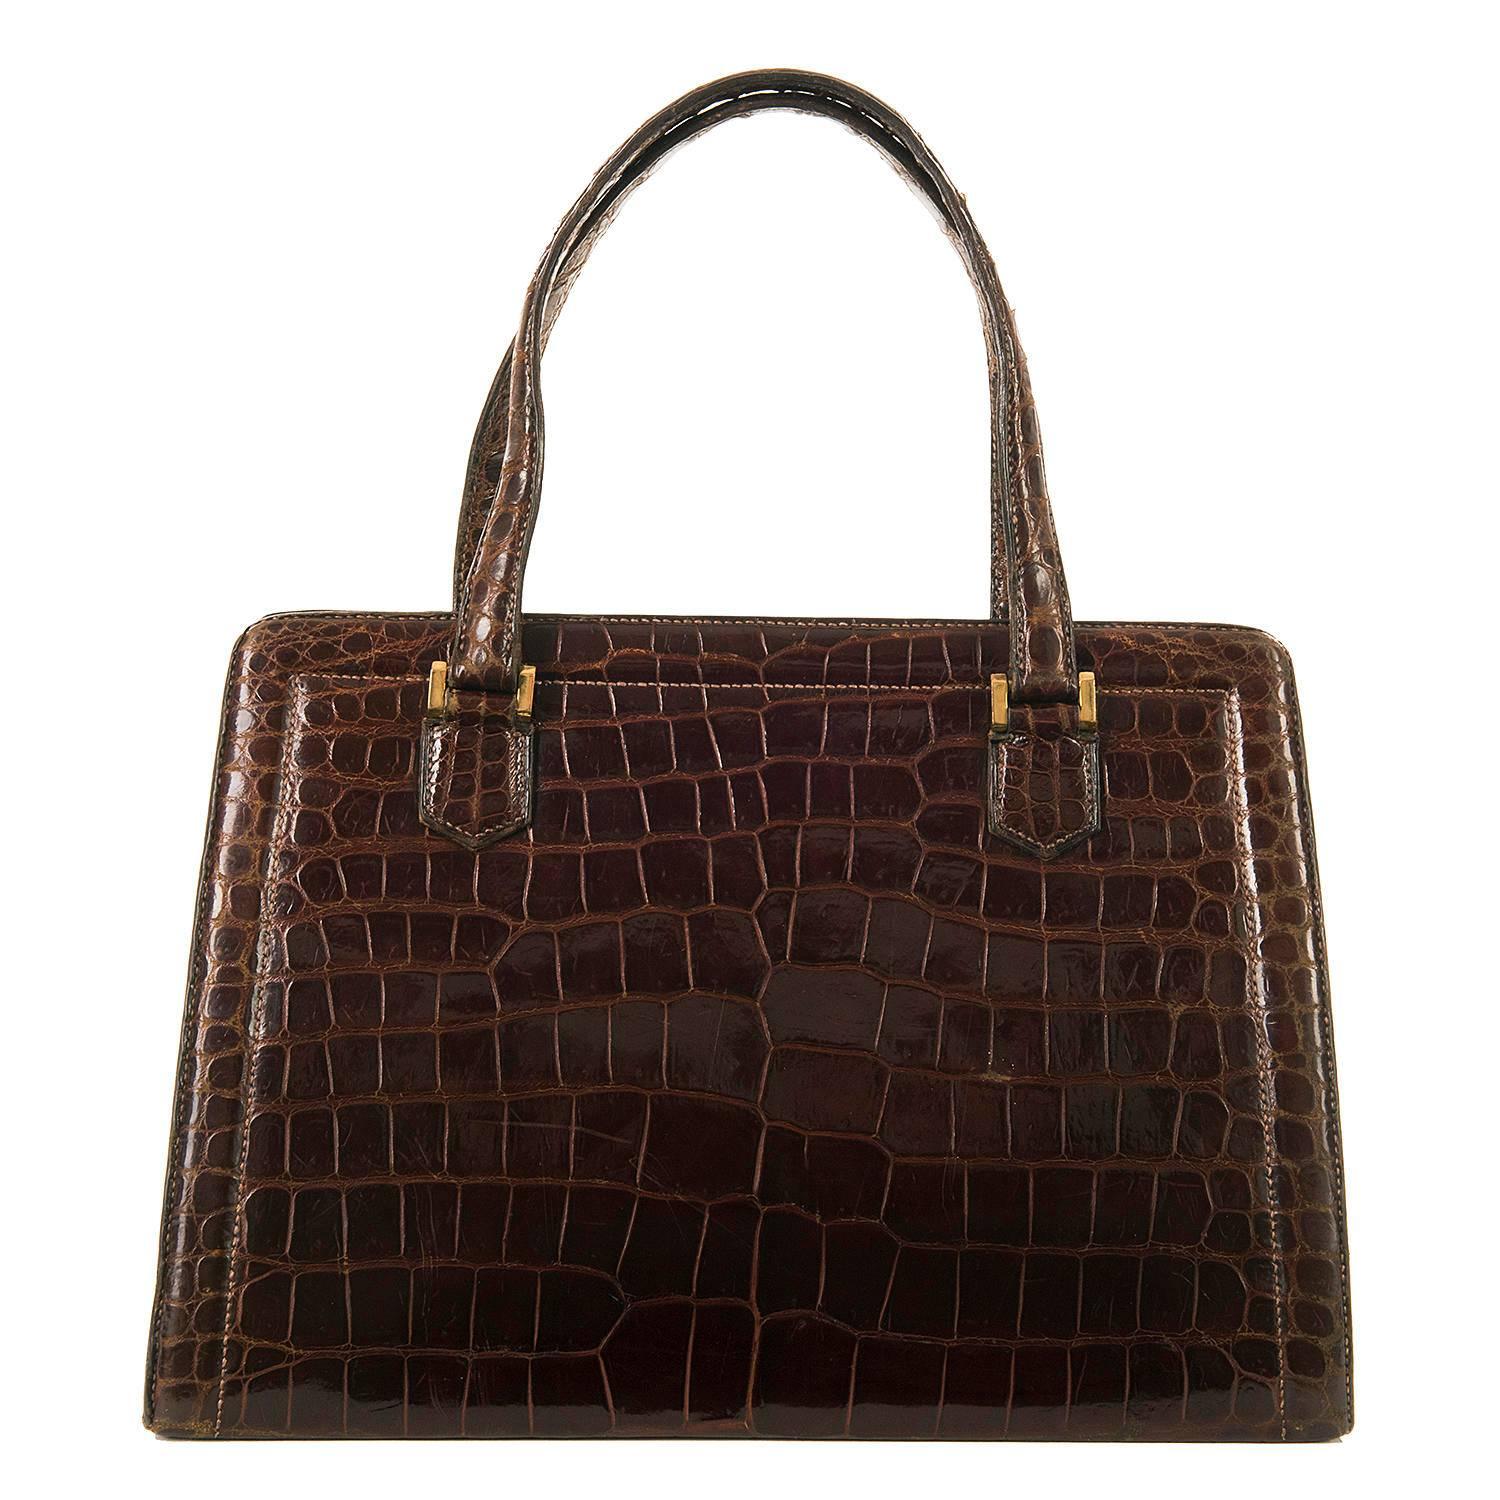 The very, very rare, much loved and much sought after Hermes 30cm Cognac Shiny Crocodile 'Sac Pullman'. The fore-runner to the famous Hermes Kelly bag, this bag bears the Hermes gilt stamp for HERMES PARIS 24 FBG ST HONORE, Hermes original Atelier